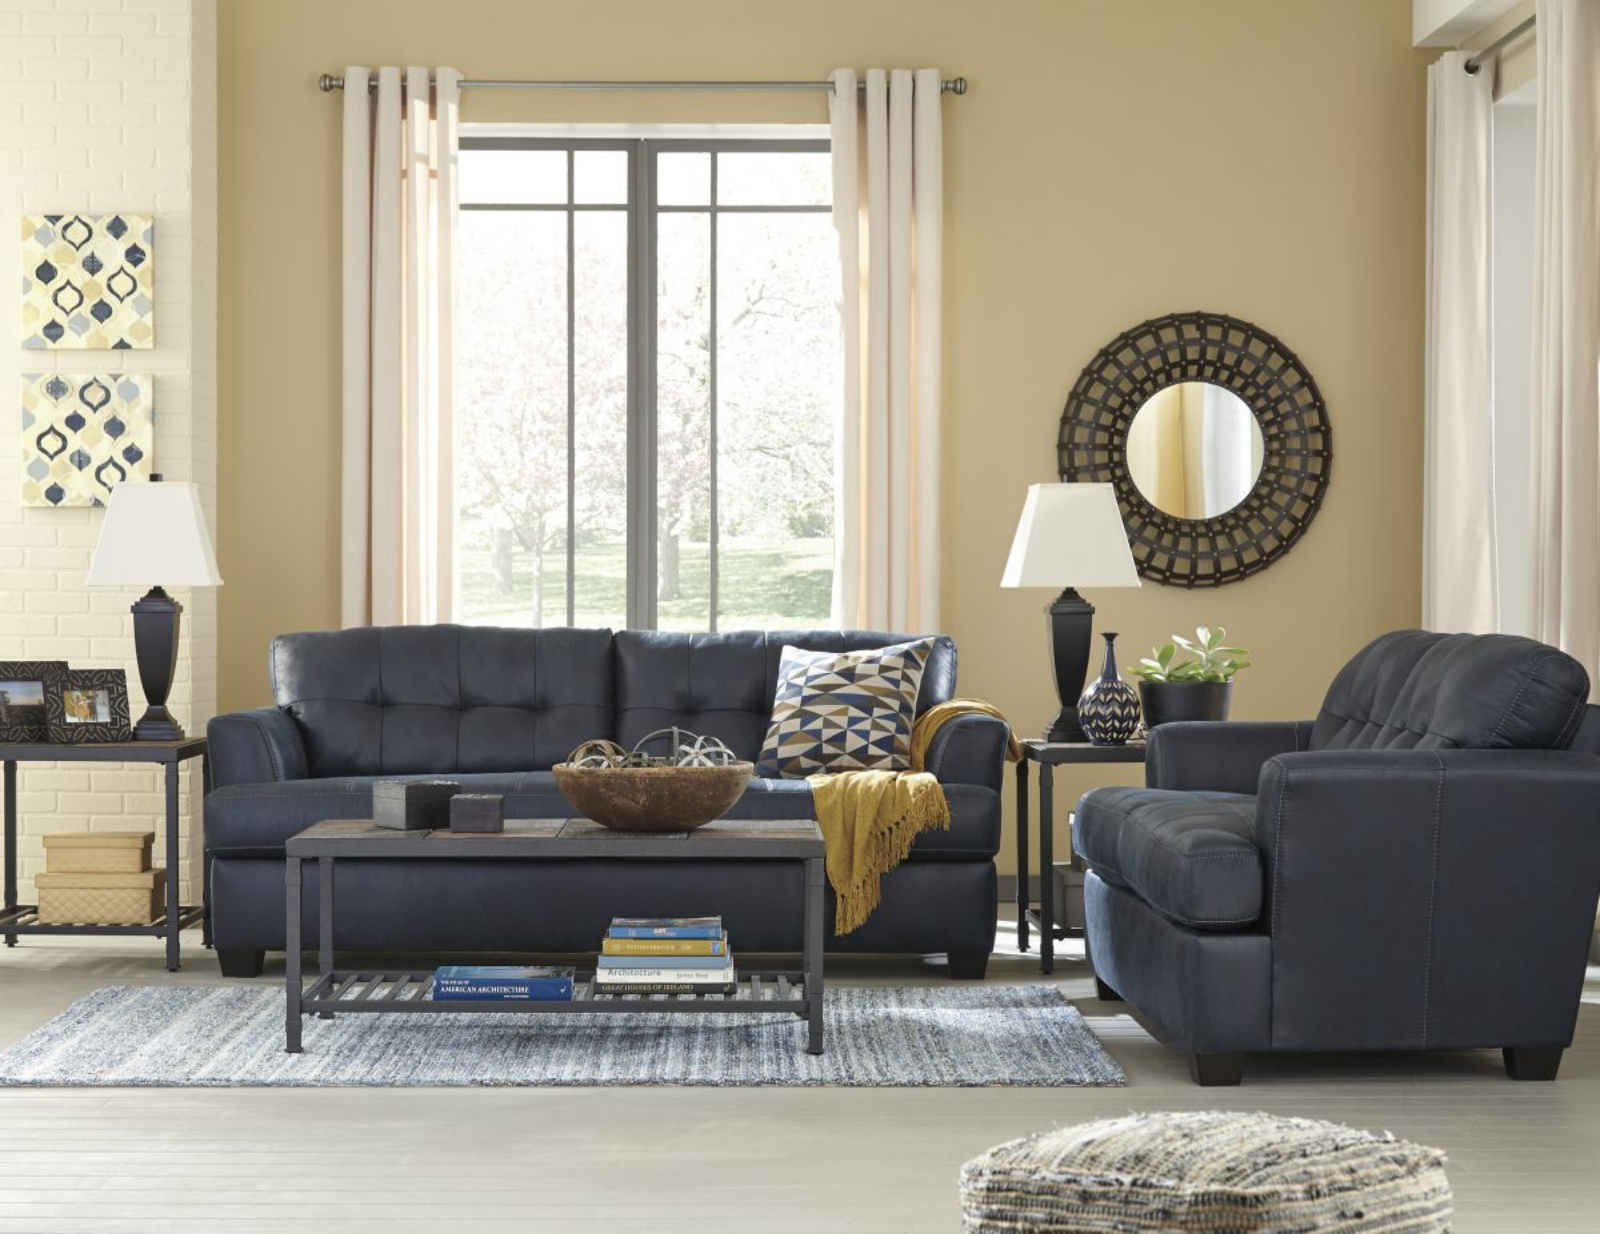 Picture of Inmon 5 Piece Living Room Group